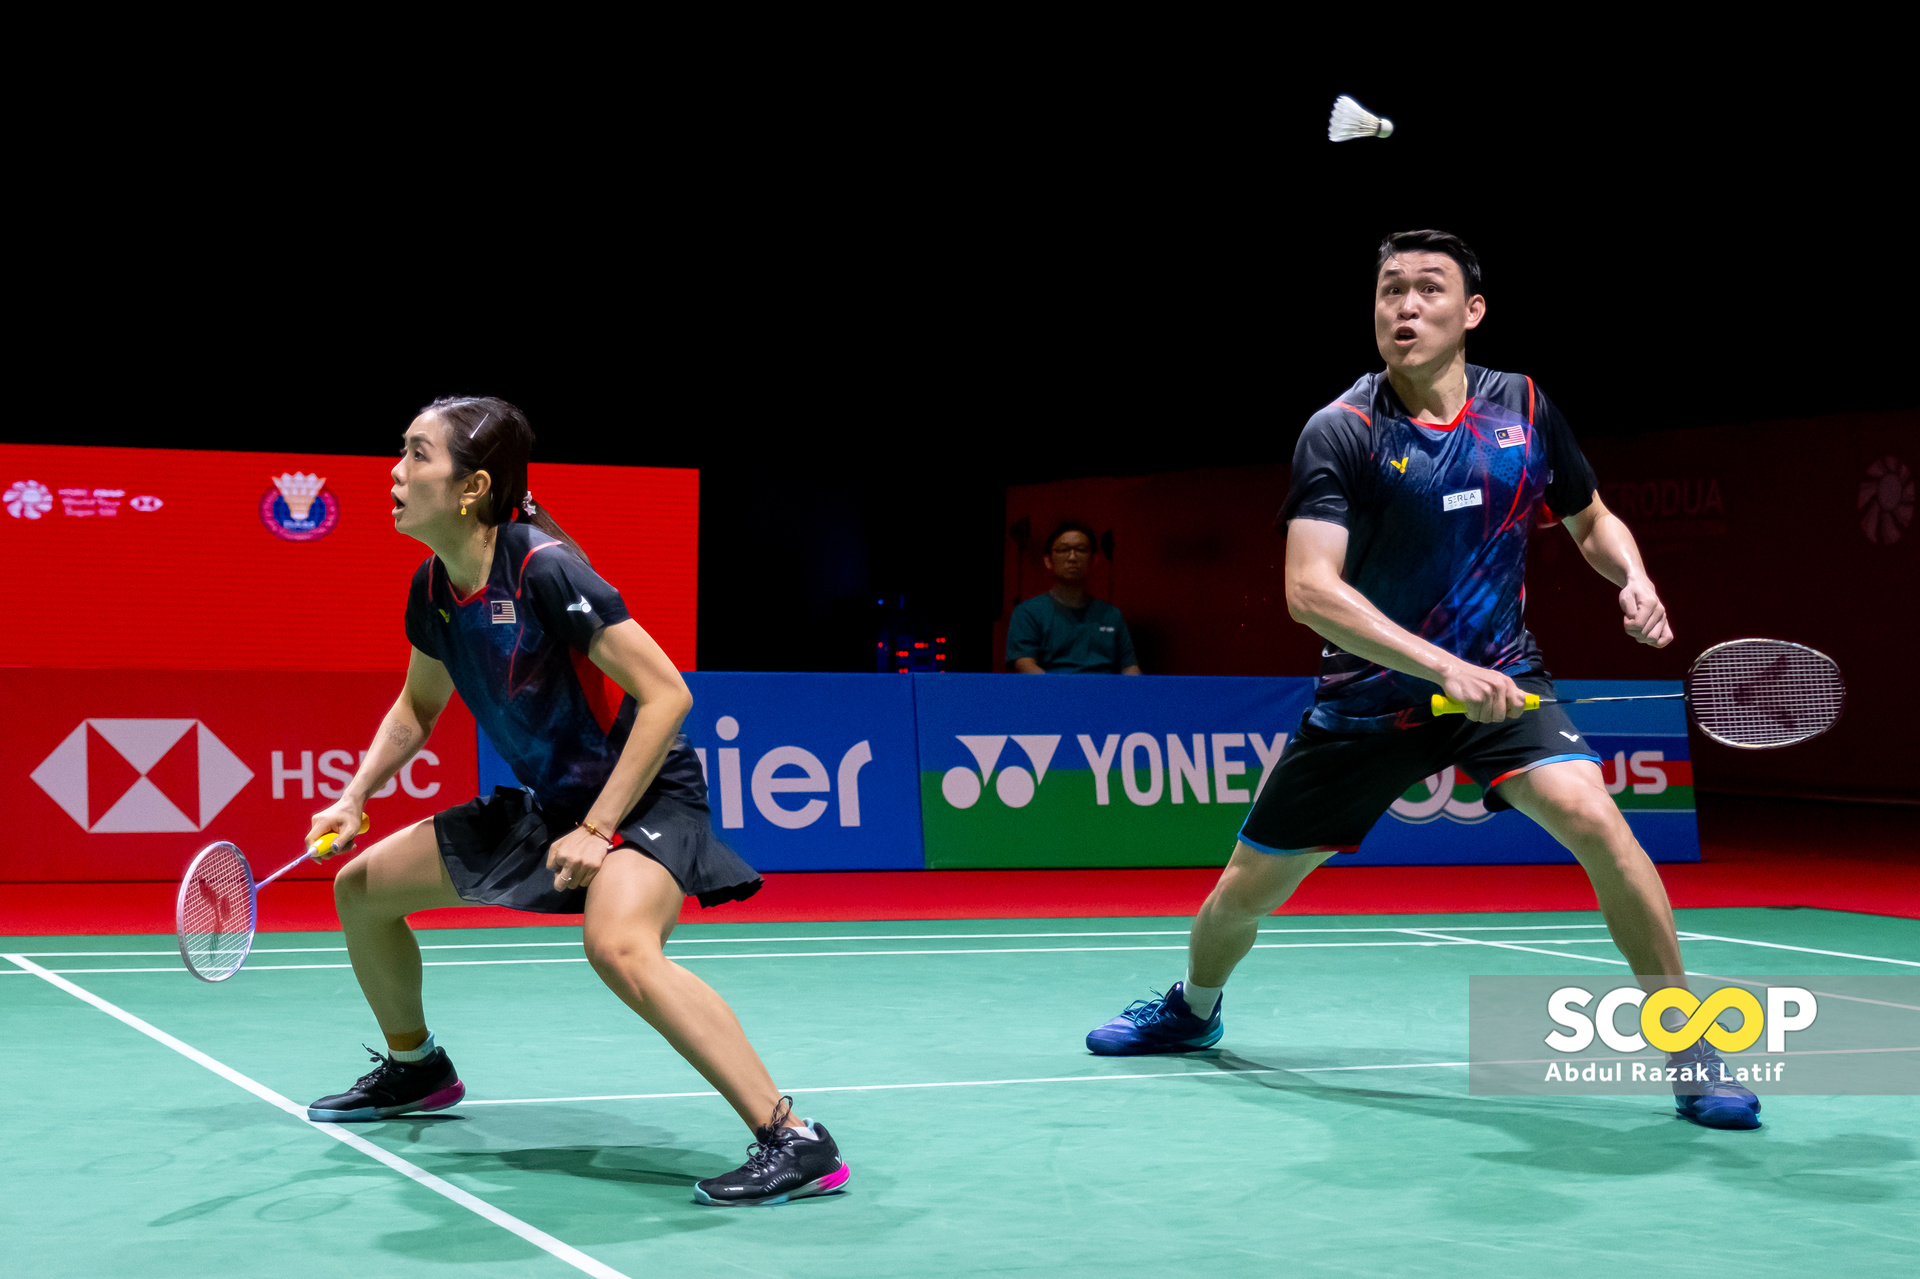 Indonesia Open: Pei Jing overcomes personal difficulties, joins M’sia’s surprising advancement to quarter-finals